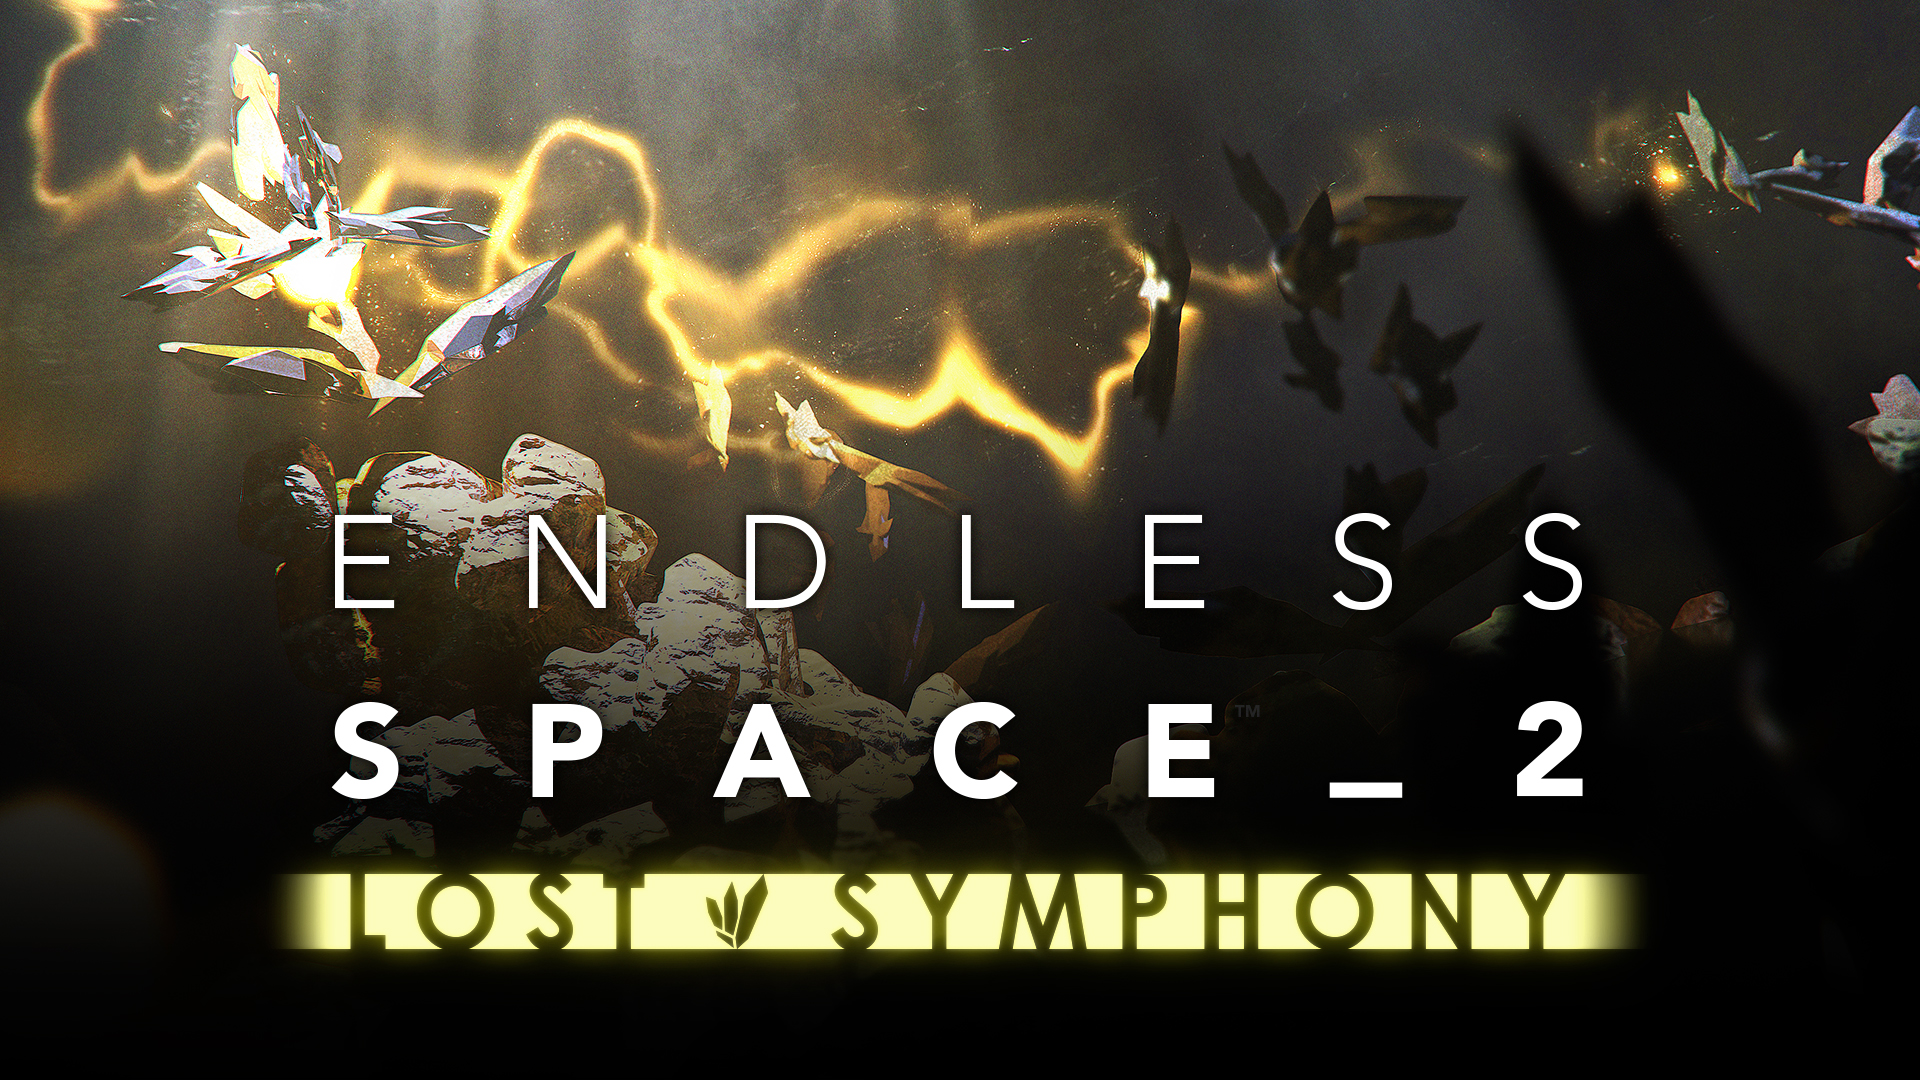 ENDLESS™ Space 2 - Lost Symphony Featured Screenshot #1